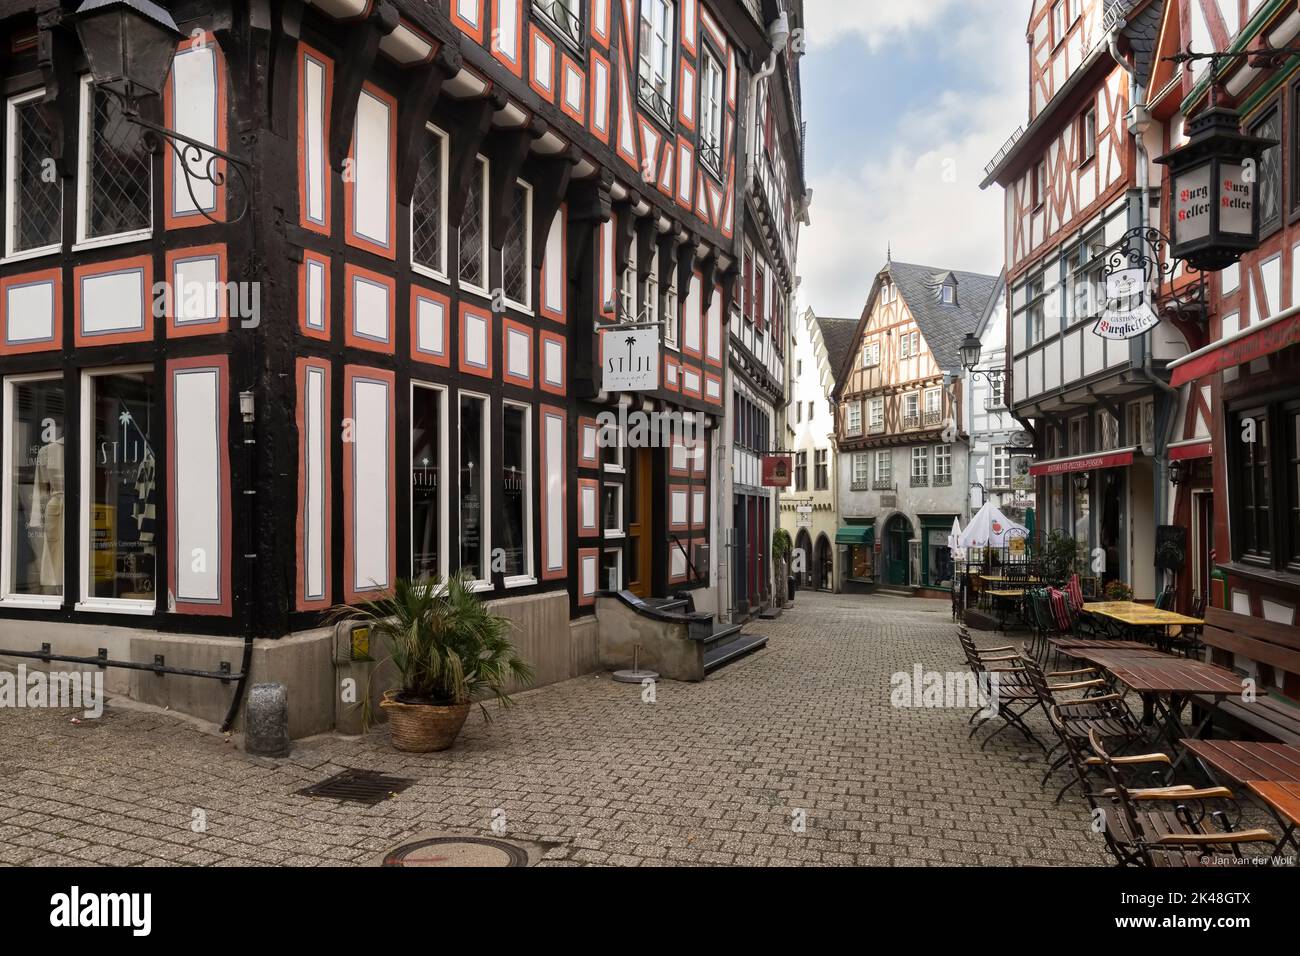 Half-timbered houses in the center of Limburg an der lahn in Germany. Stock Photo